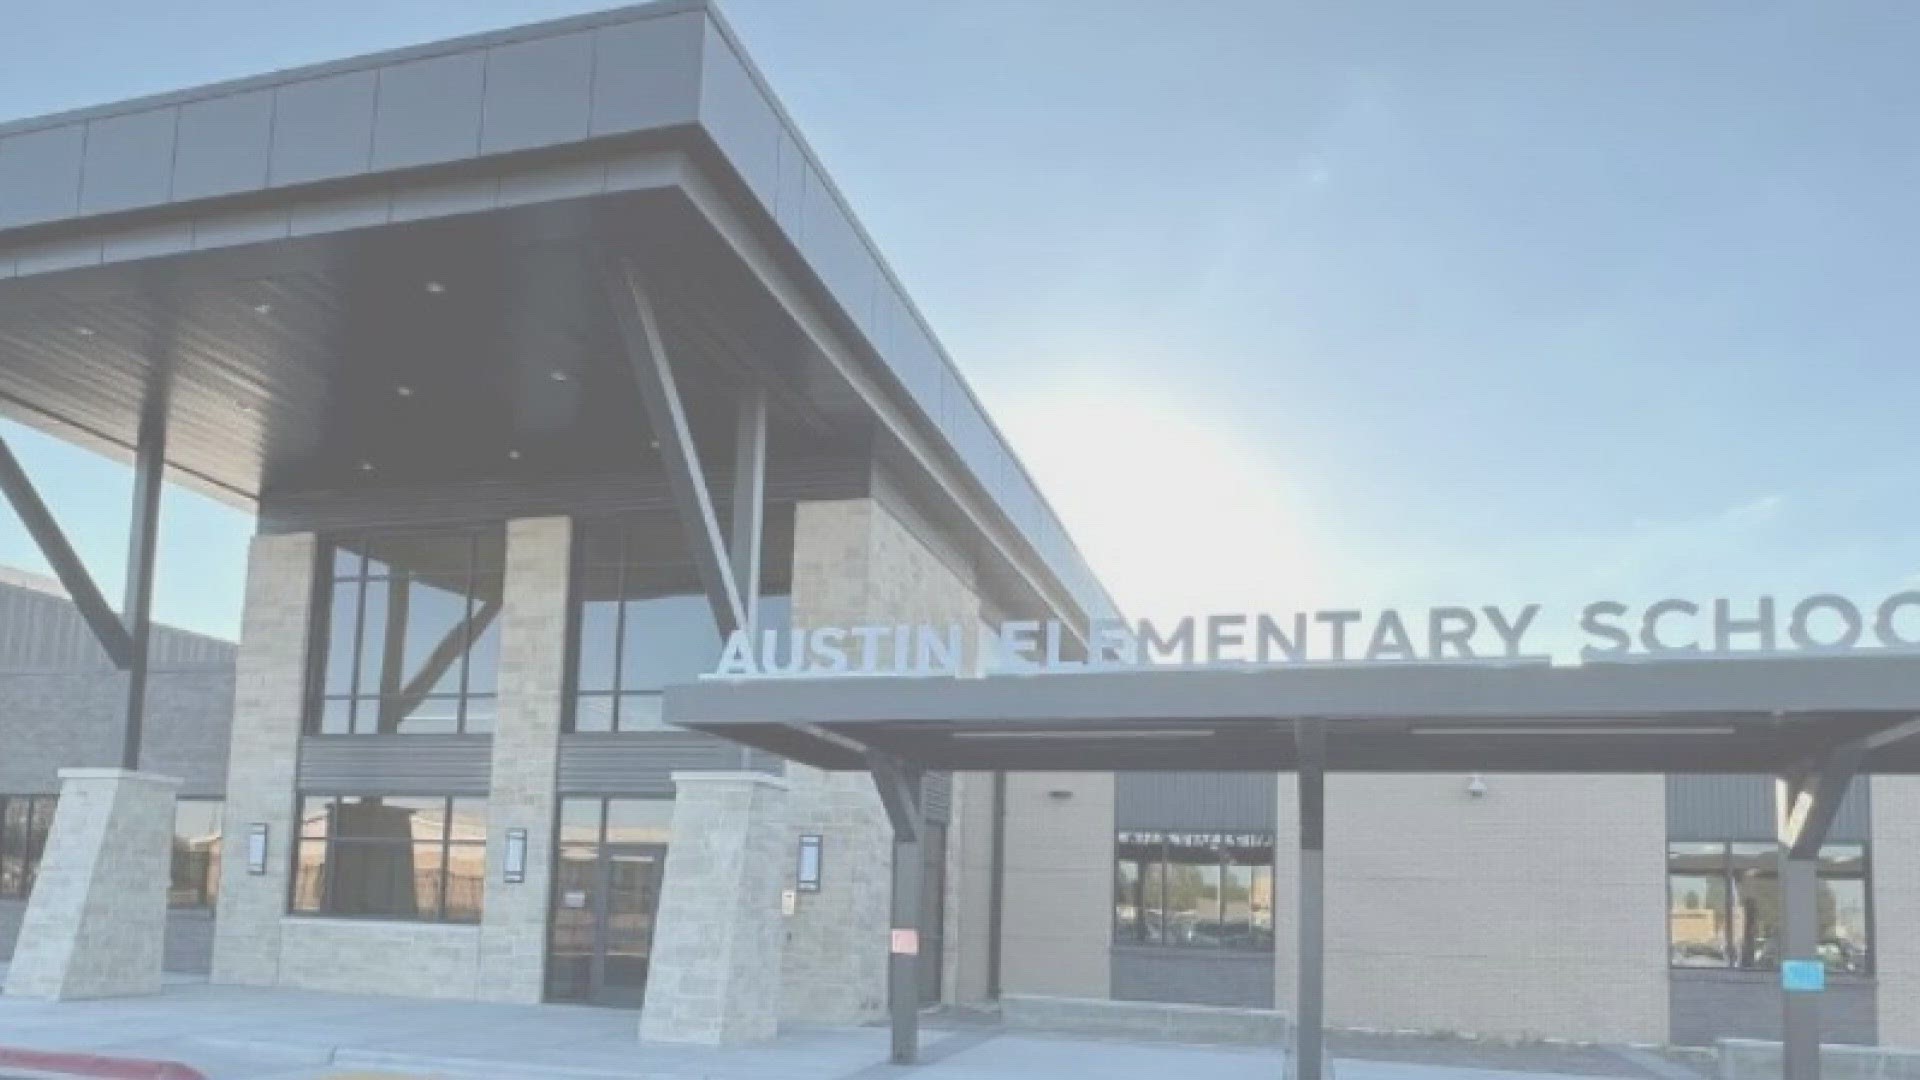 Austin Elementary was one of five projects included in the May 2021 bond. Now, PBTISD has announced its grand opening for mid-September.